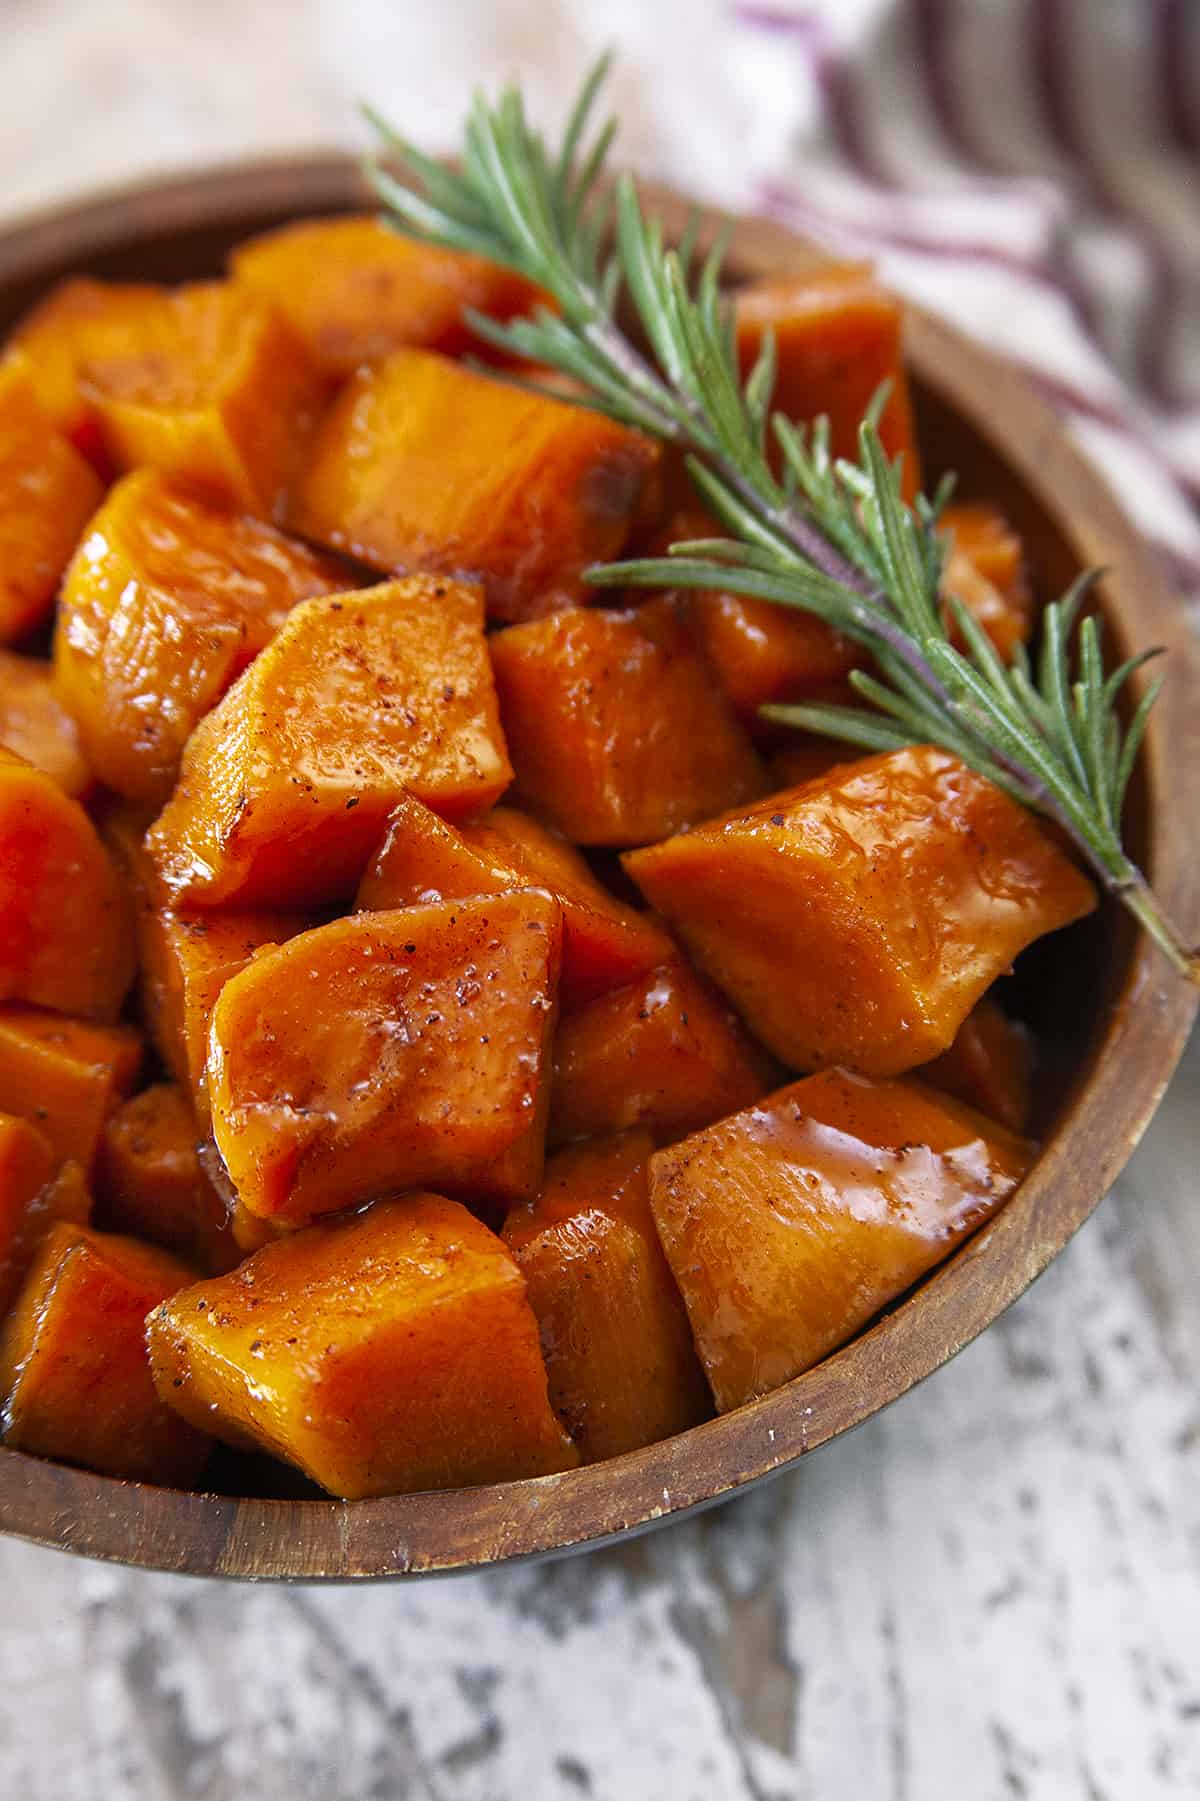 Candied yams with a sprig of rosemary in a wooden bowl. 